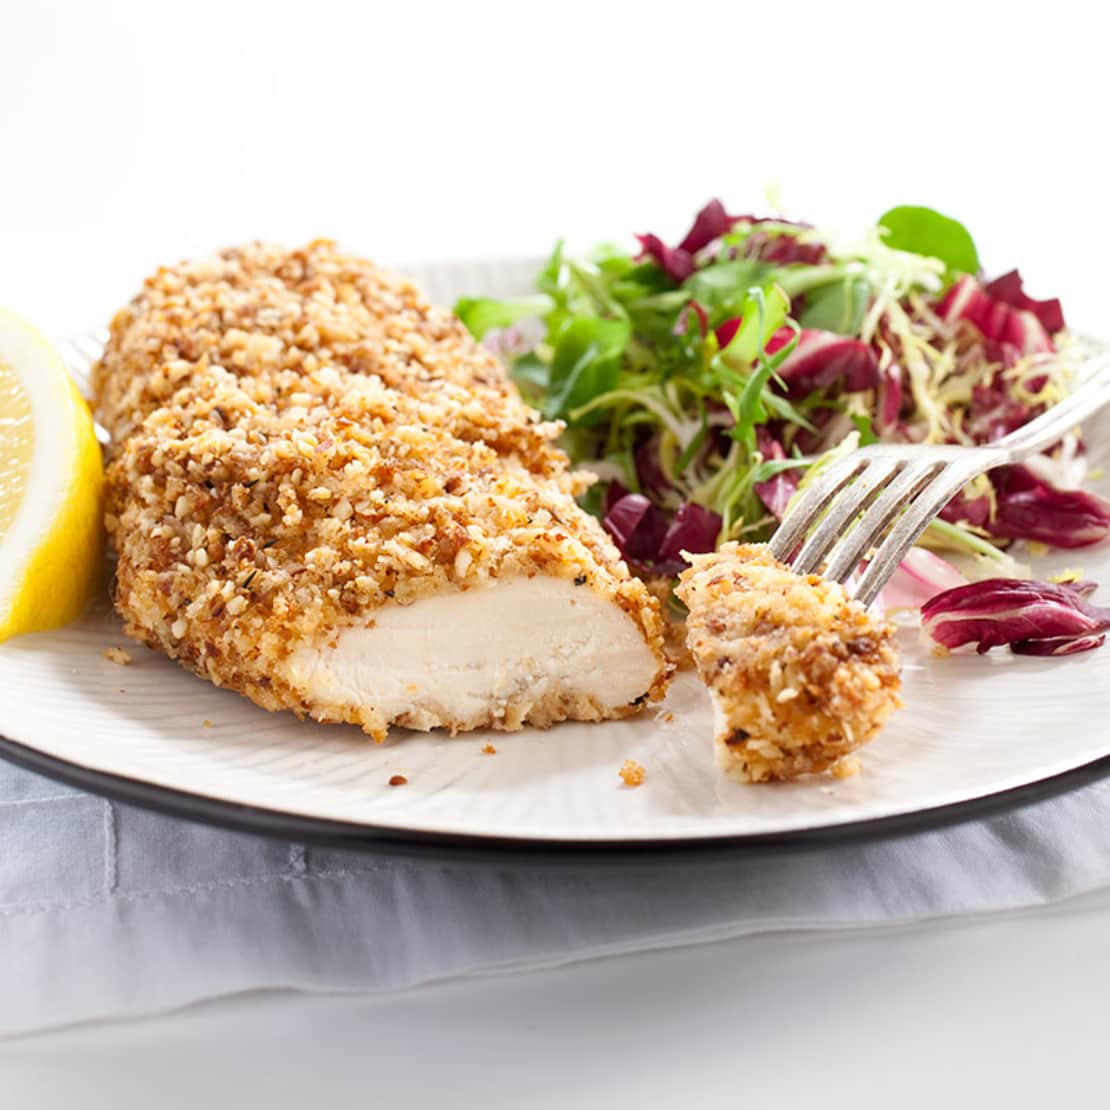 Nut-Crusted Chicken Cutlets with Orange and Oregano